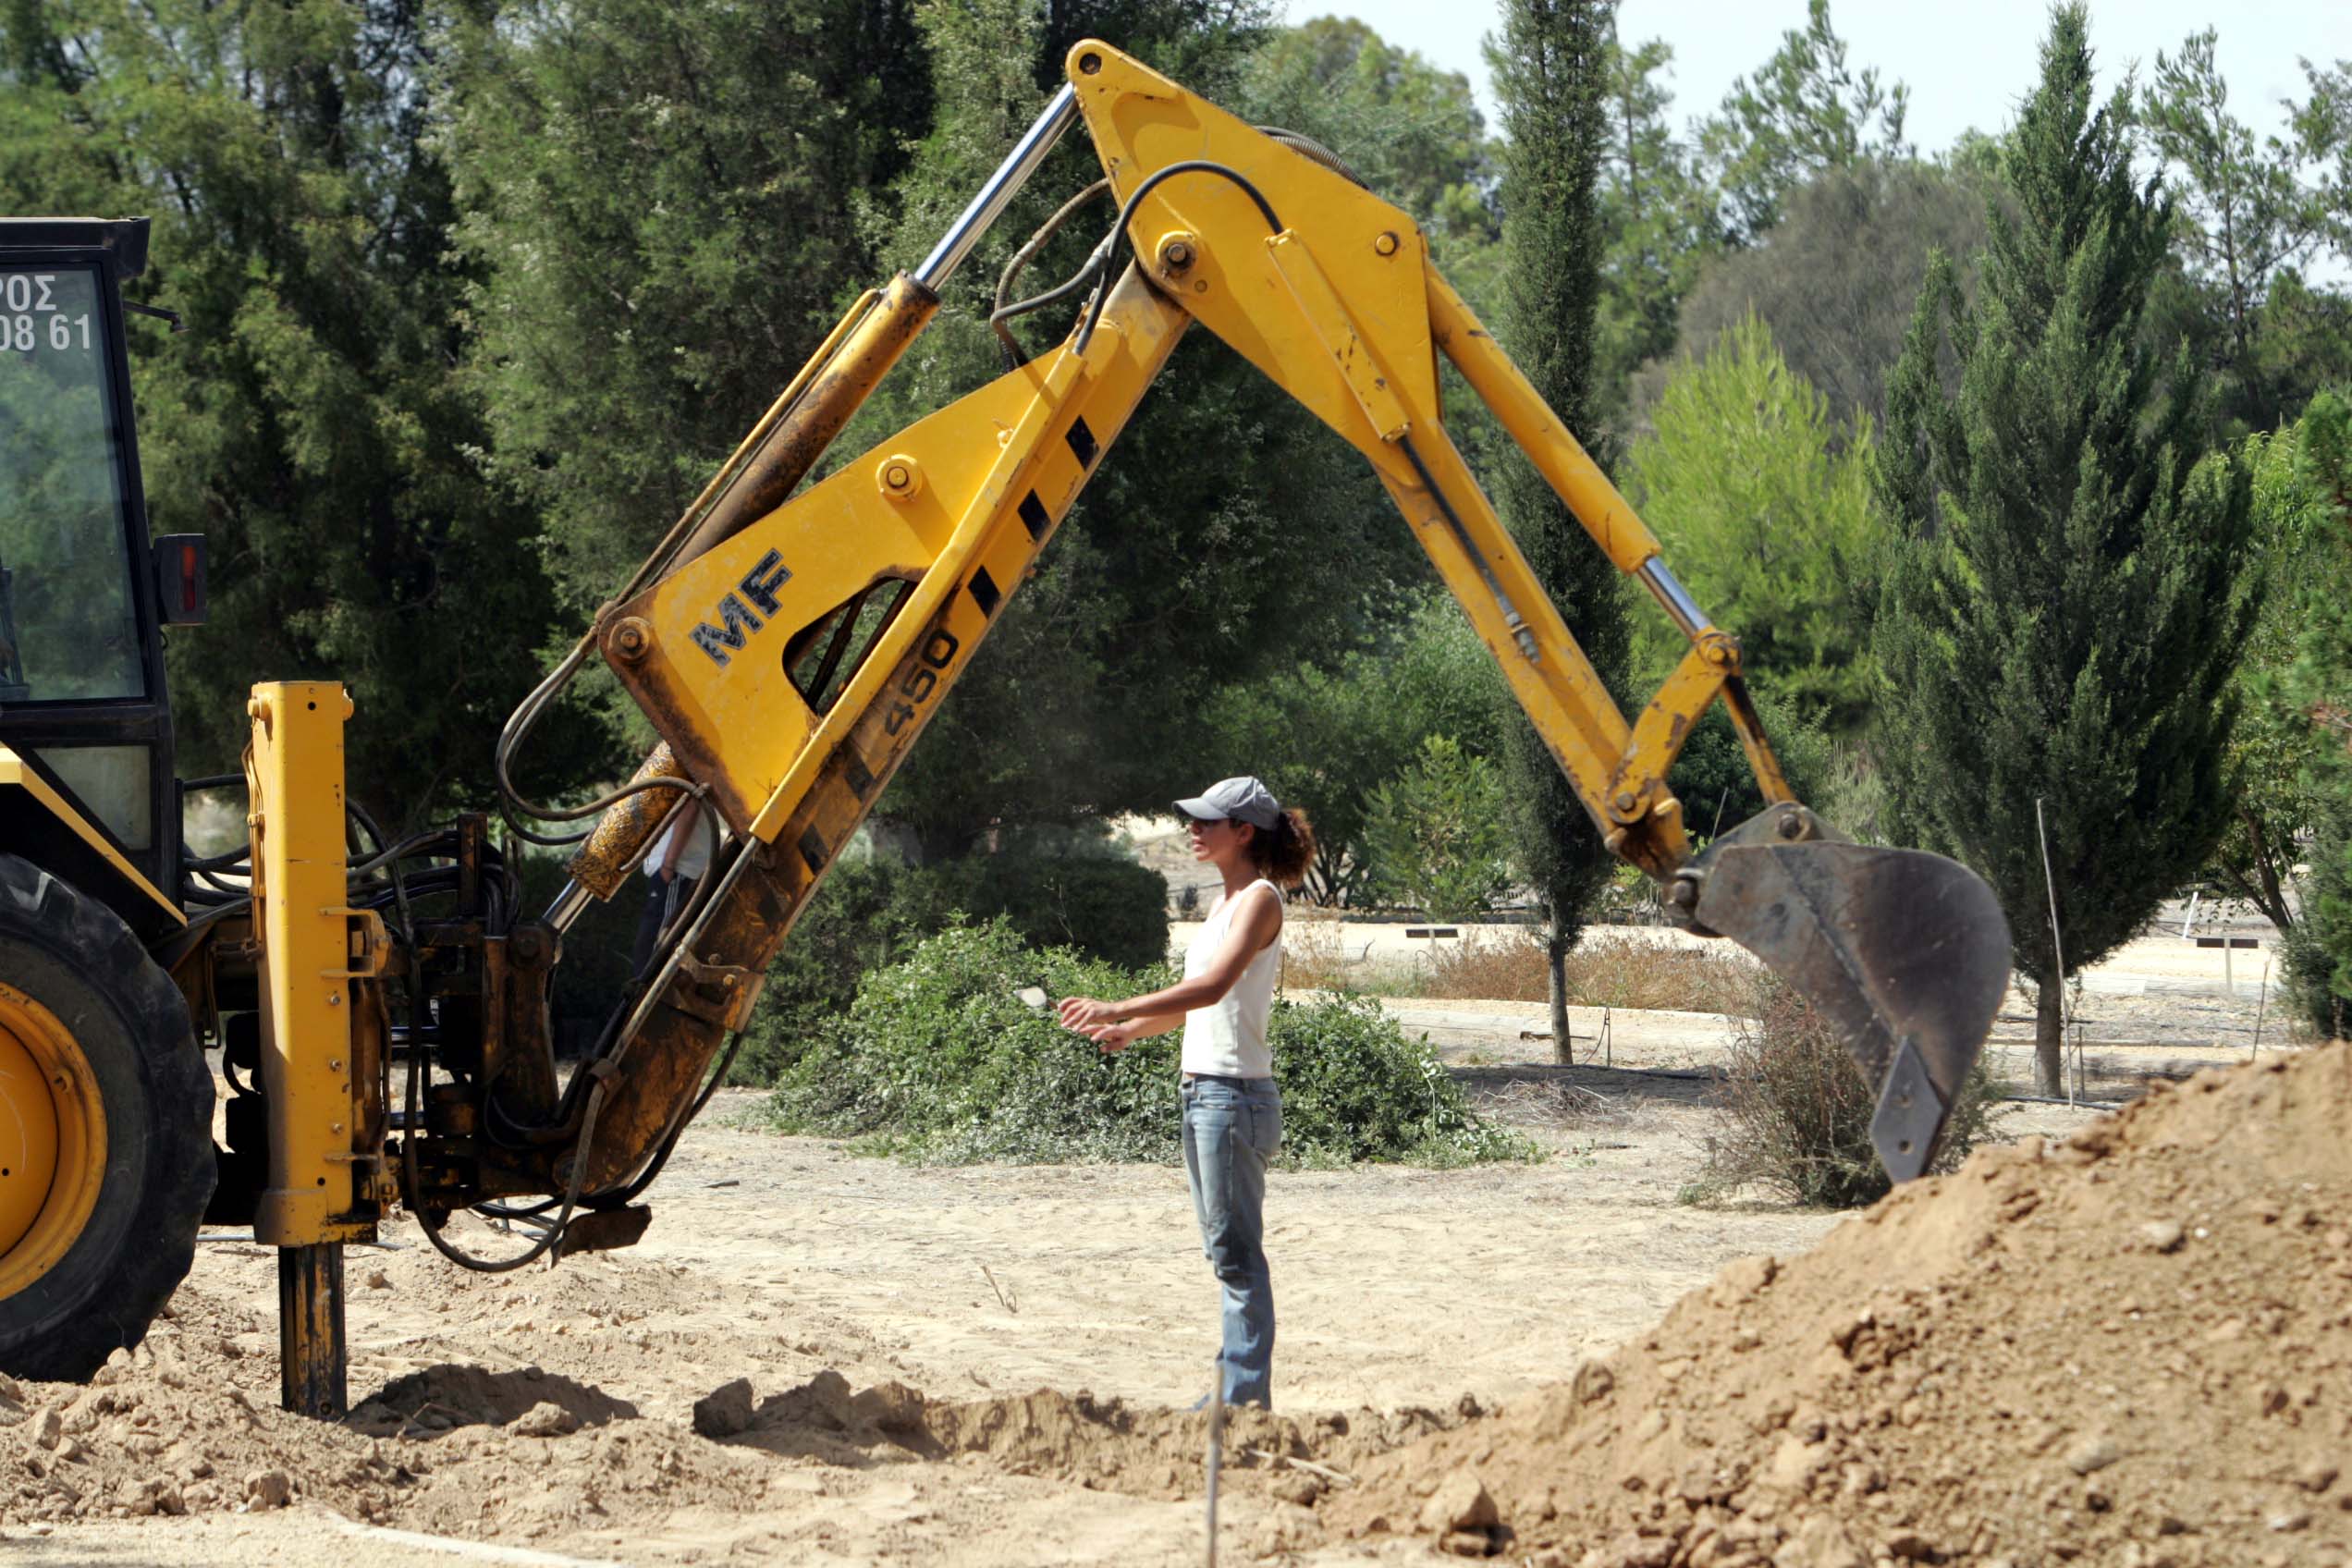 Archaeologists and digger through Cyprus’ missing persons funding